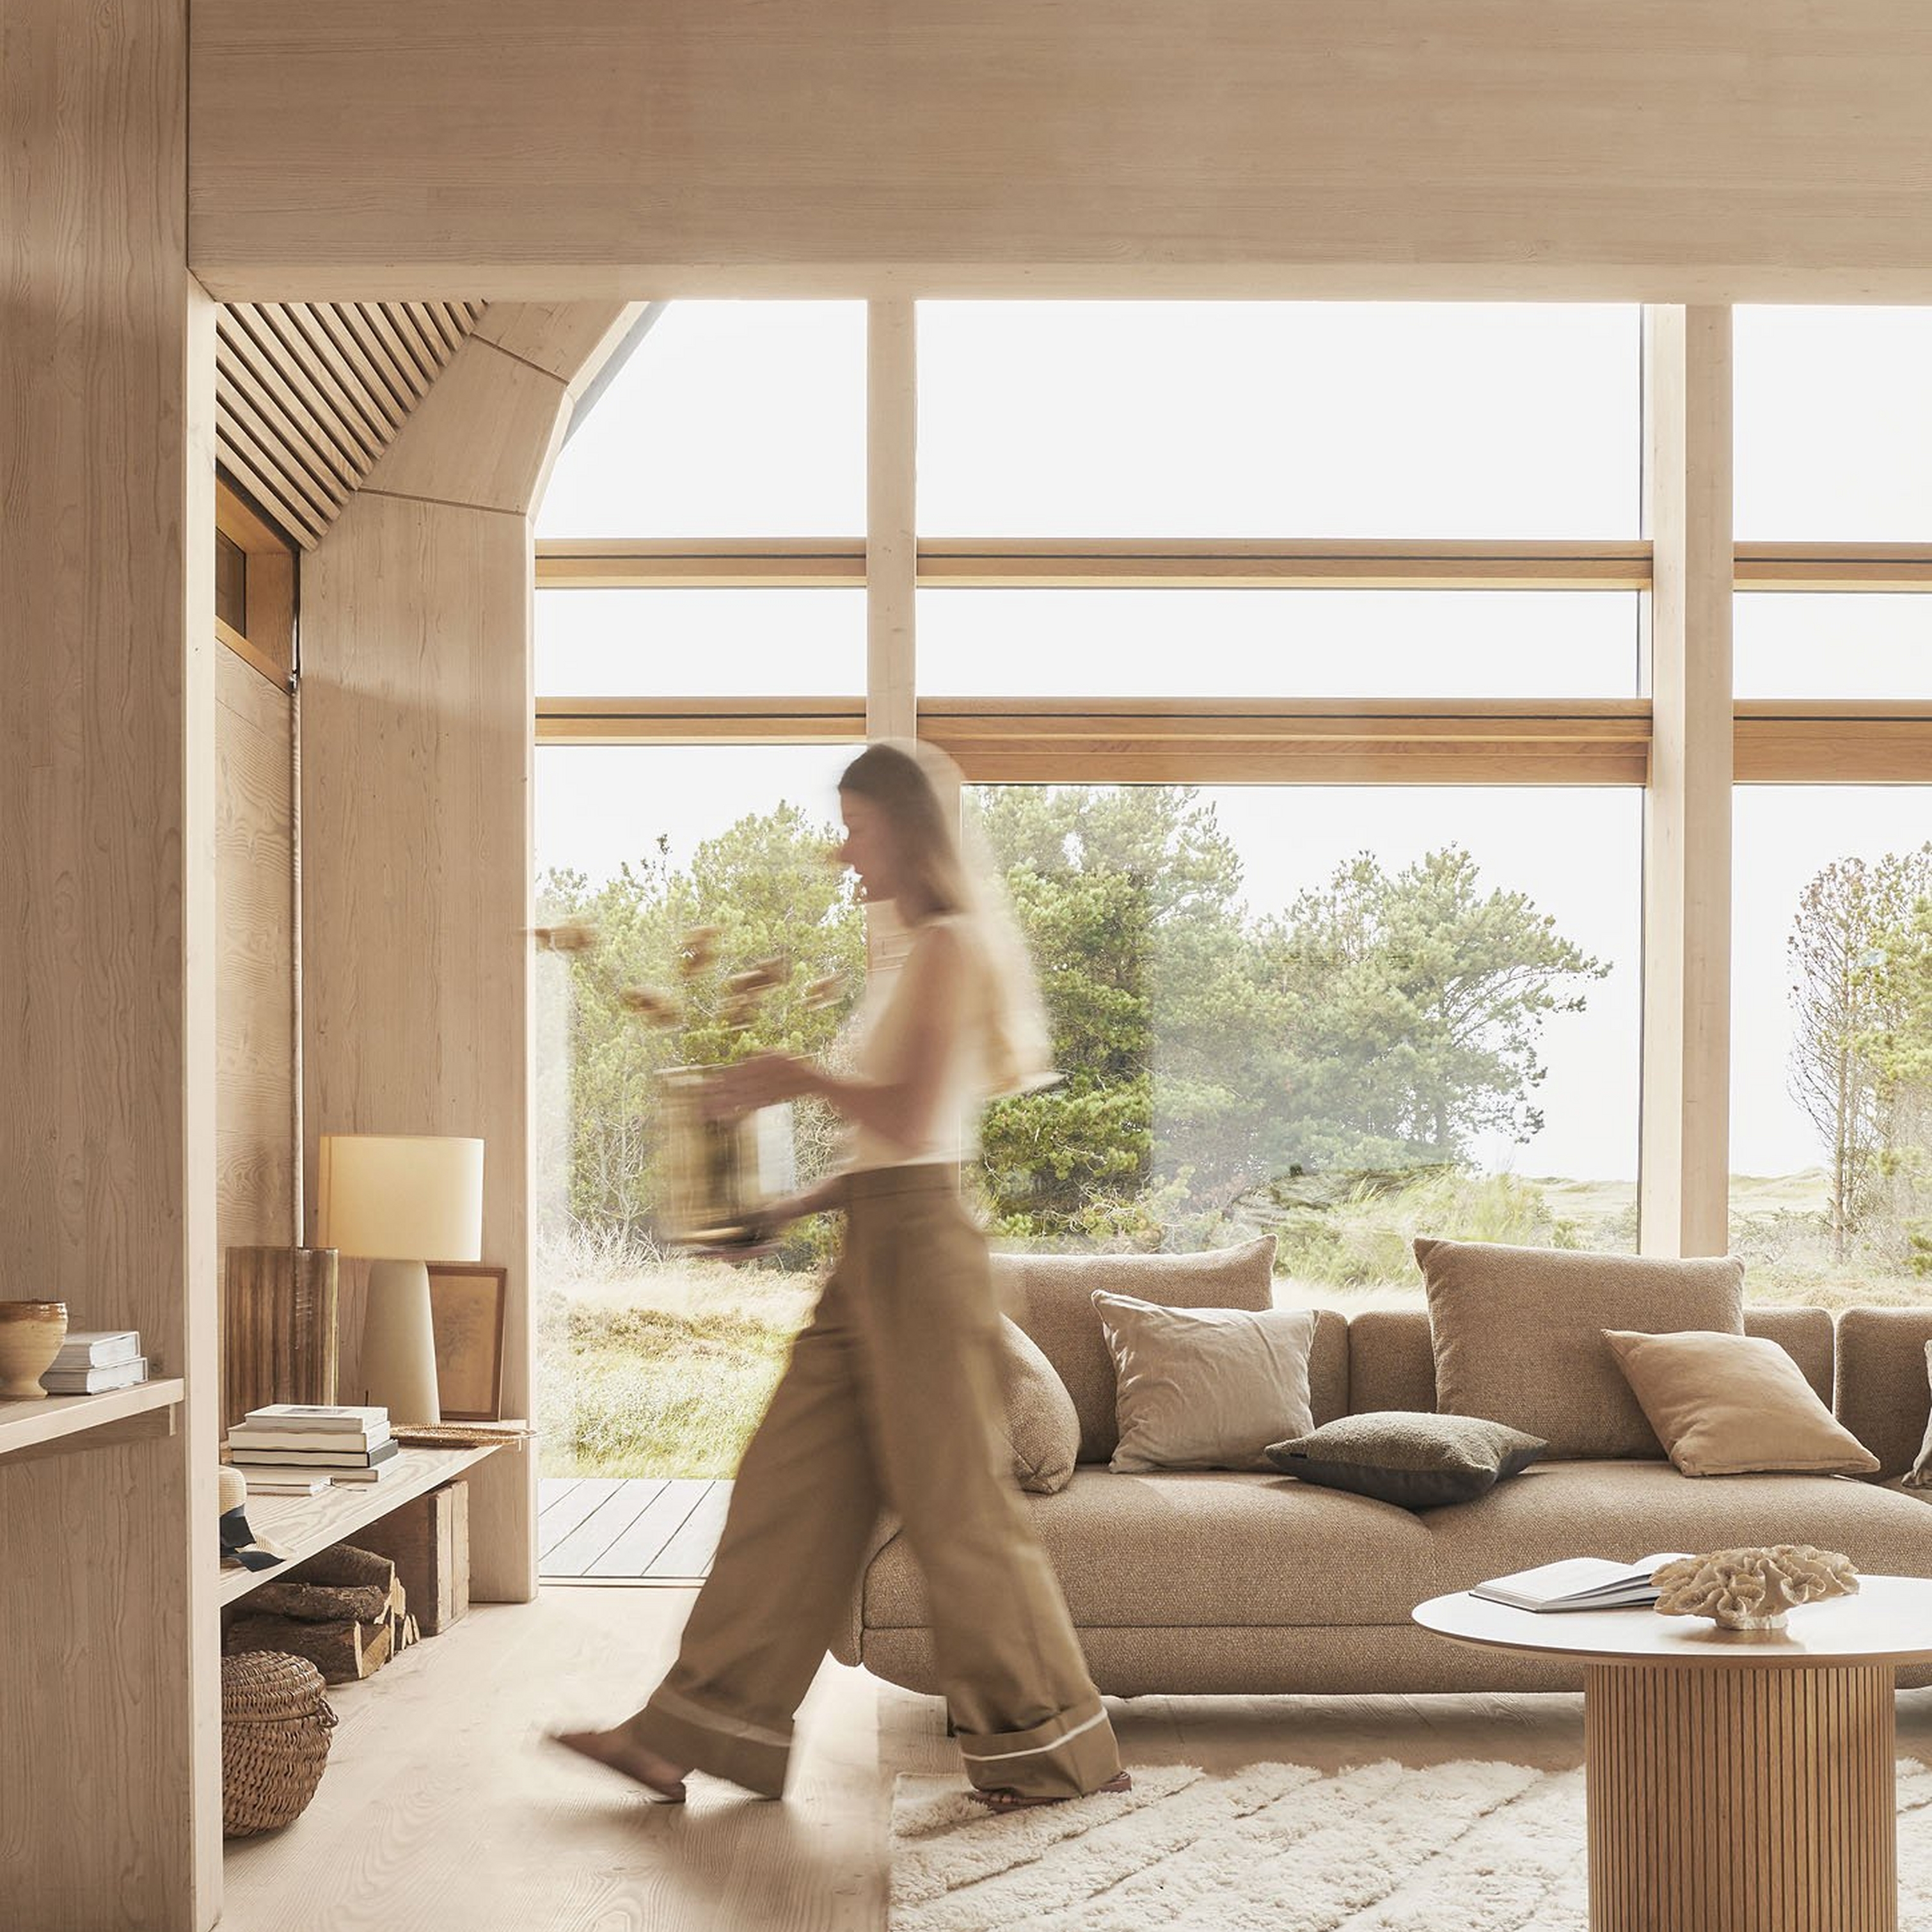 Motion-blurred person walking in a sunlit, wooden-beamed room with a cozy sofa.